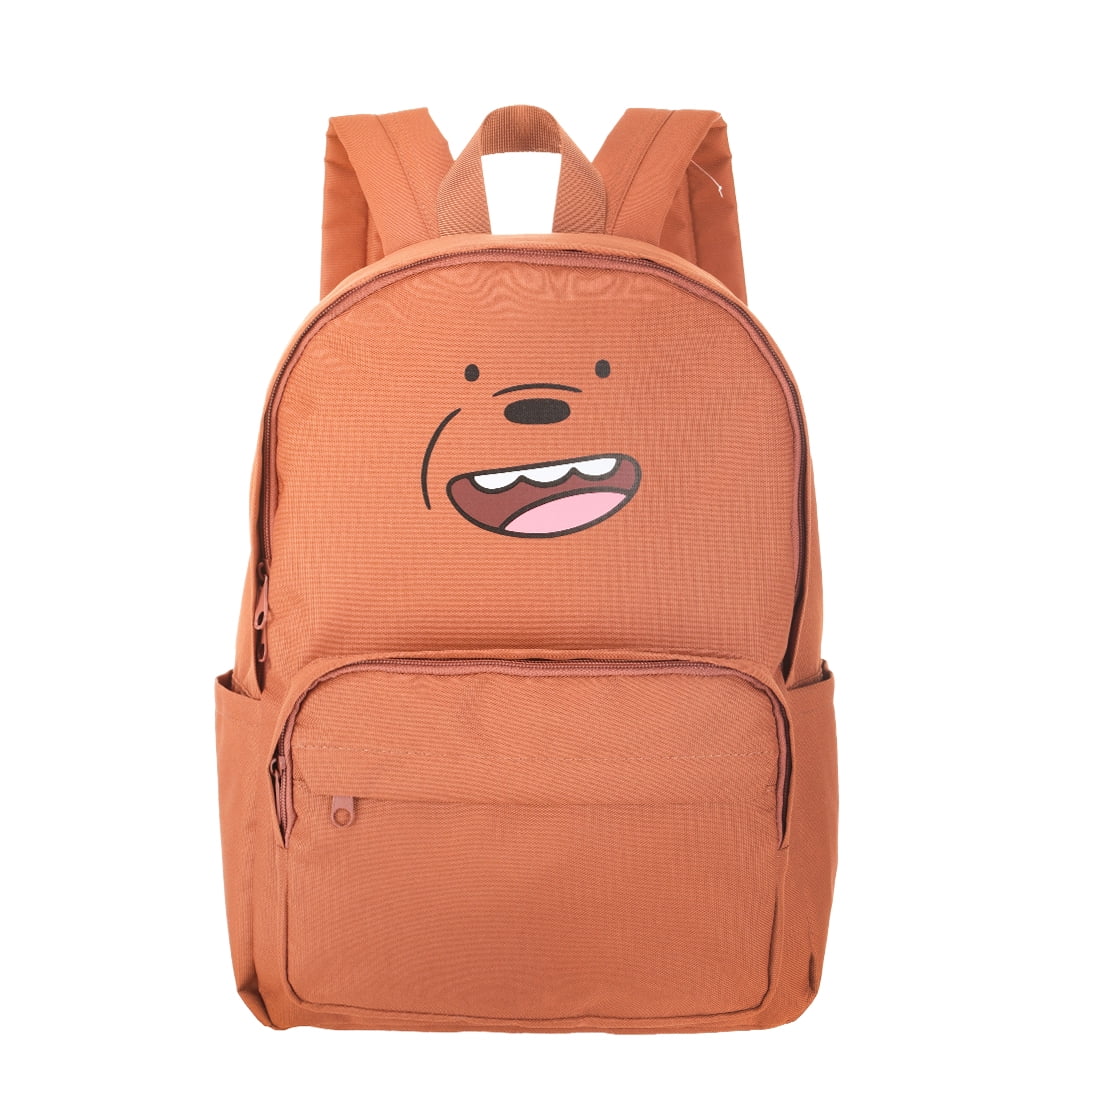 We Bare Bears Collection 5.0 Backpack